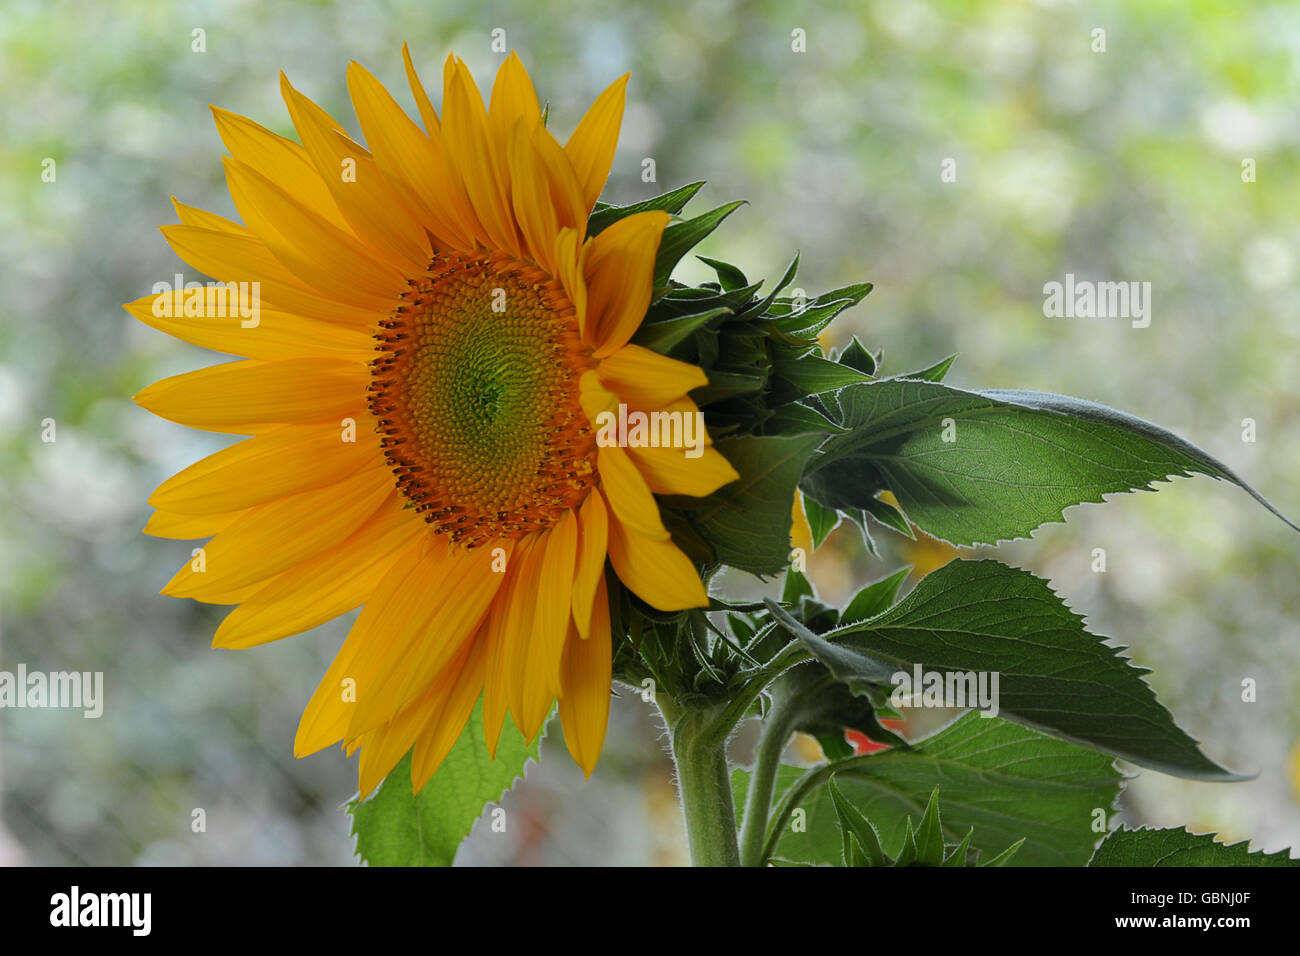 Sunflower is blossoming colorful on a natural background Stock Photo